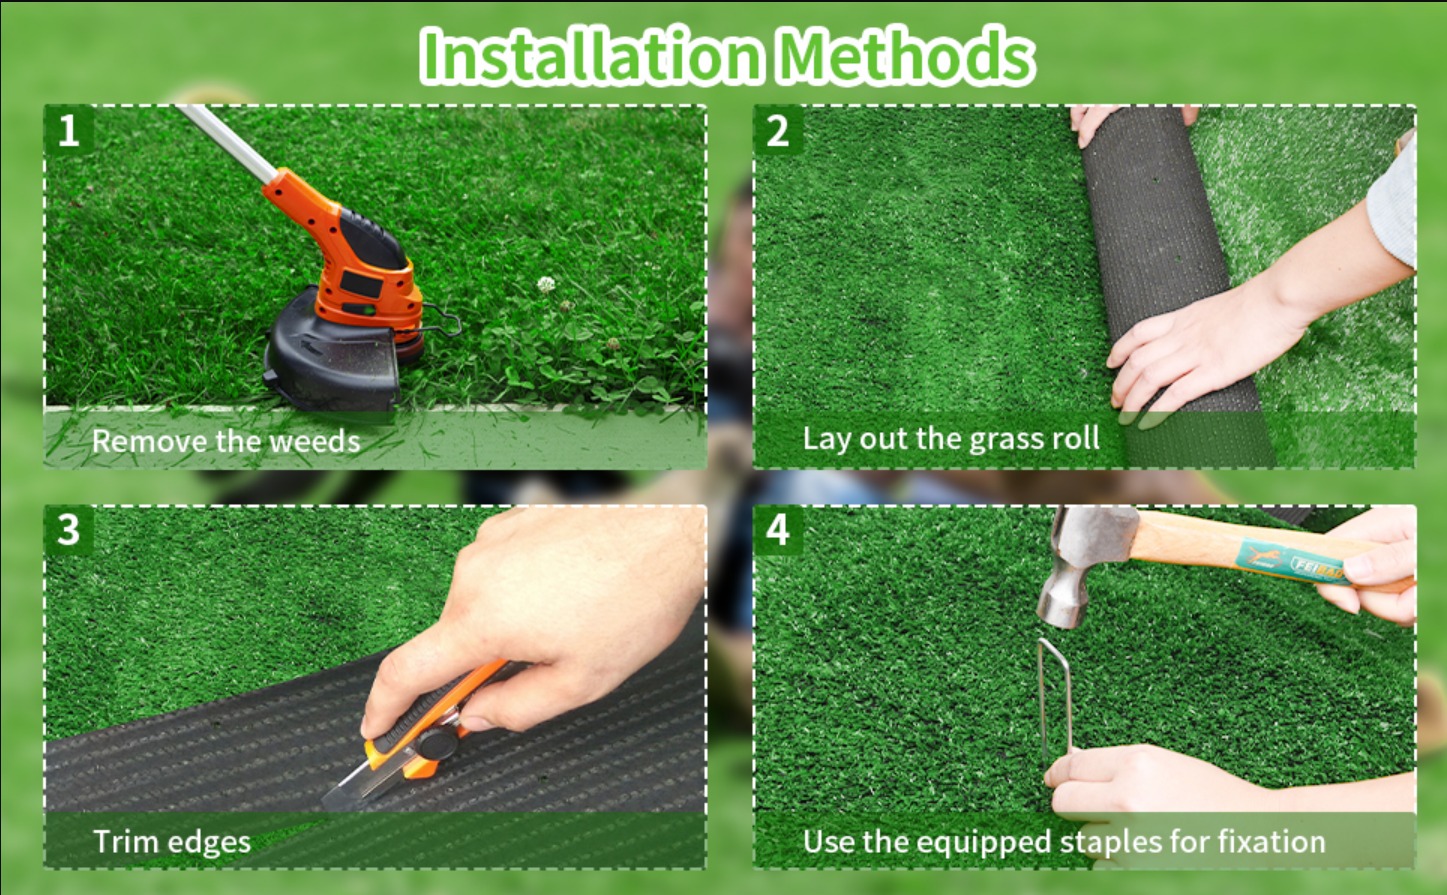 How to Install Fake Grass